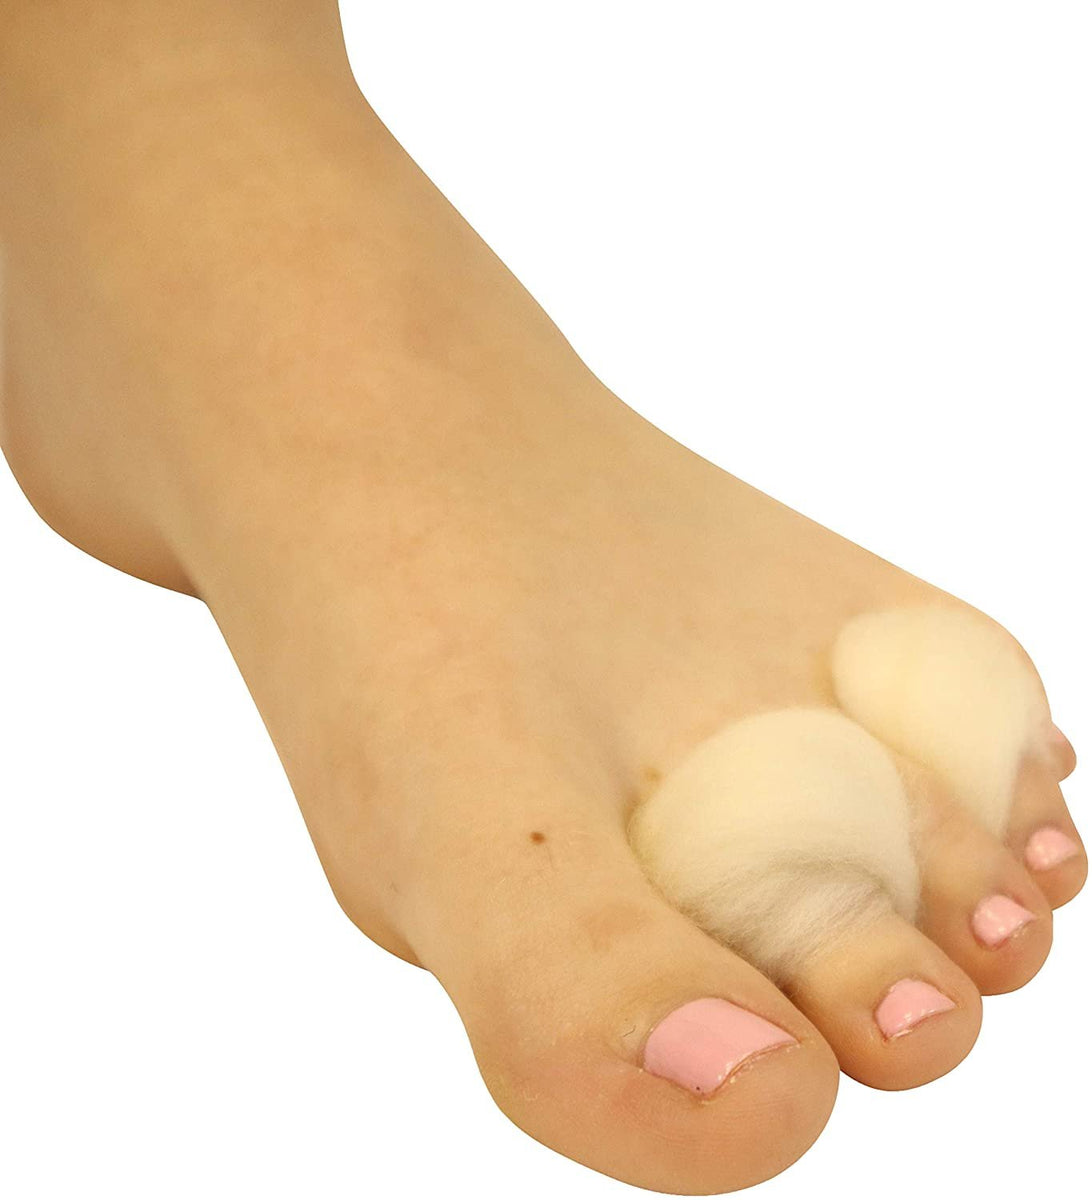 Lambs Wool for Toes Lambs Wool Cushion for Bunion Soft Toe Separator Wool  Pads Blister Prevention Cushion for Feet Lambs Wool Toe Pads for Hiking